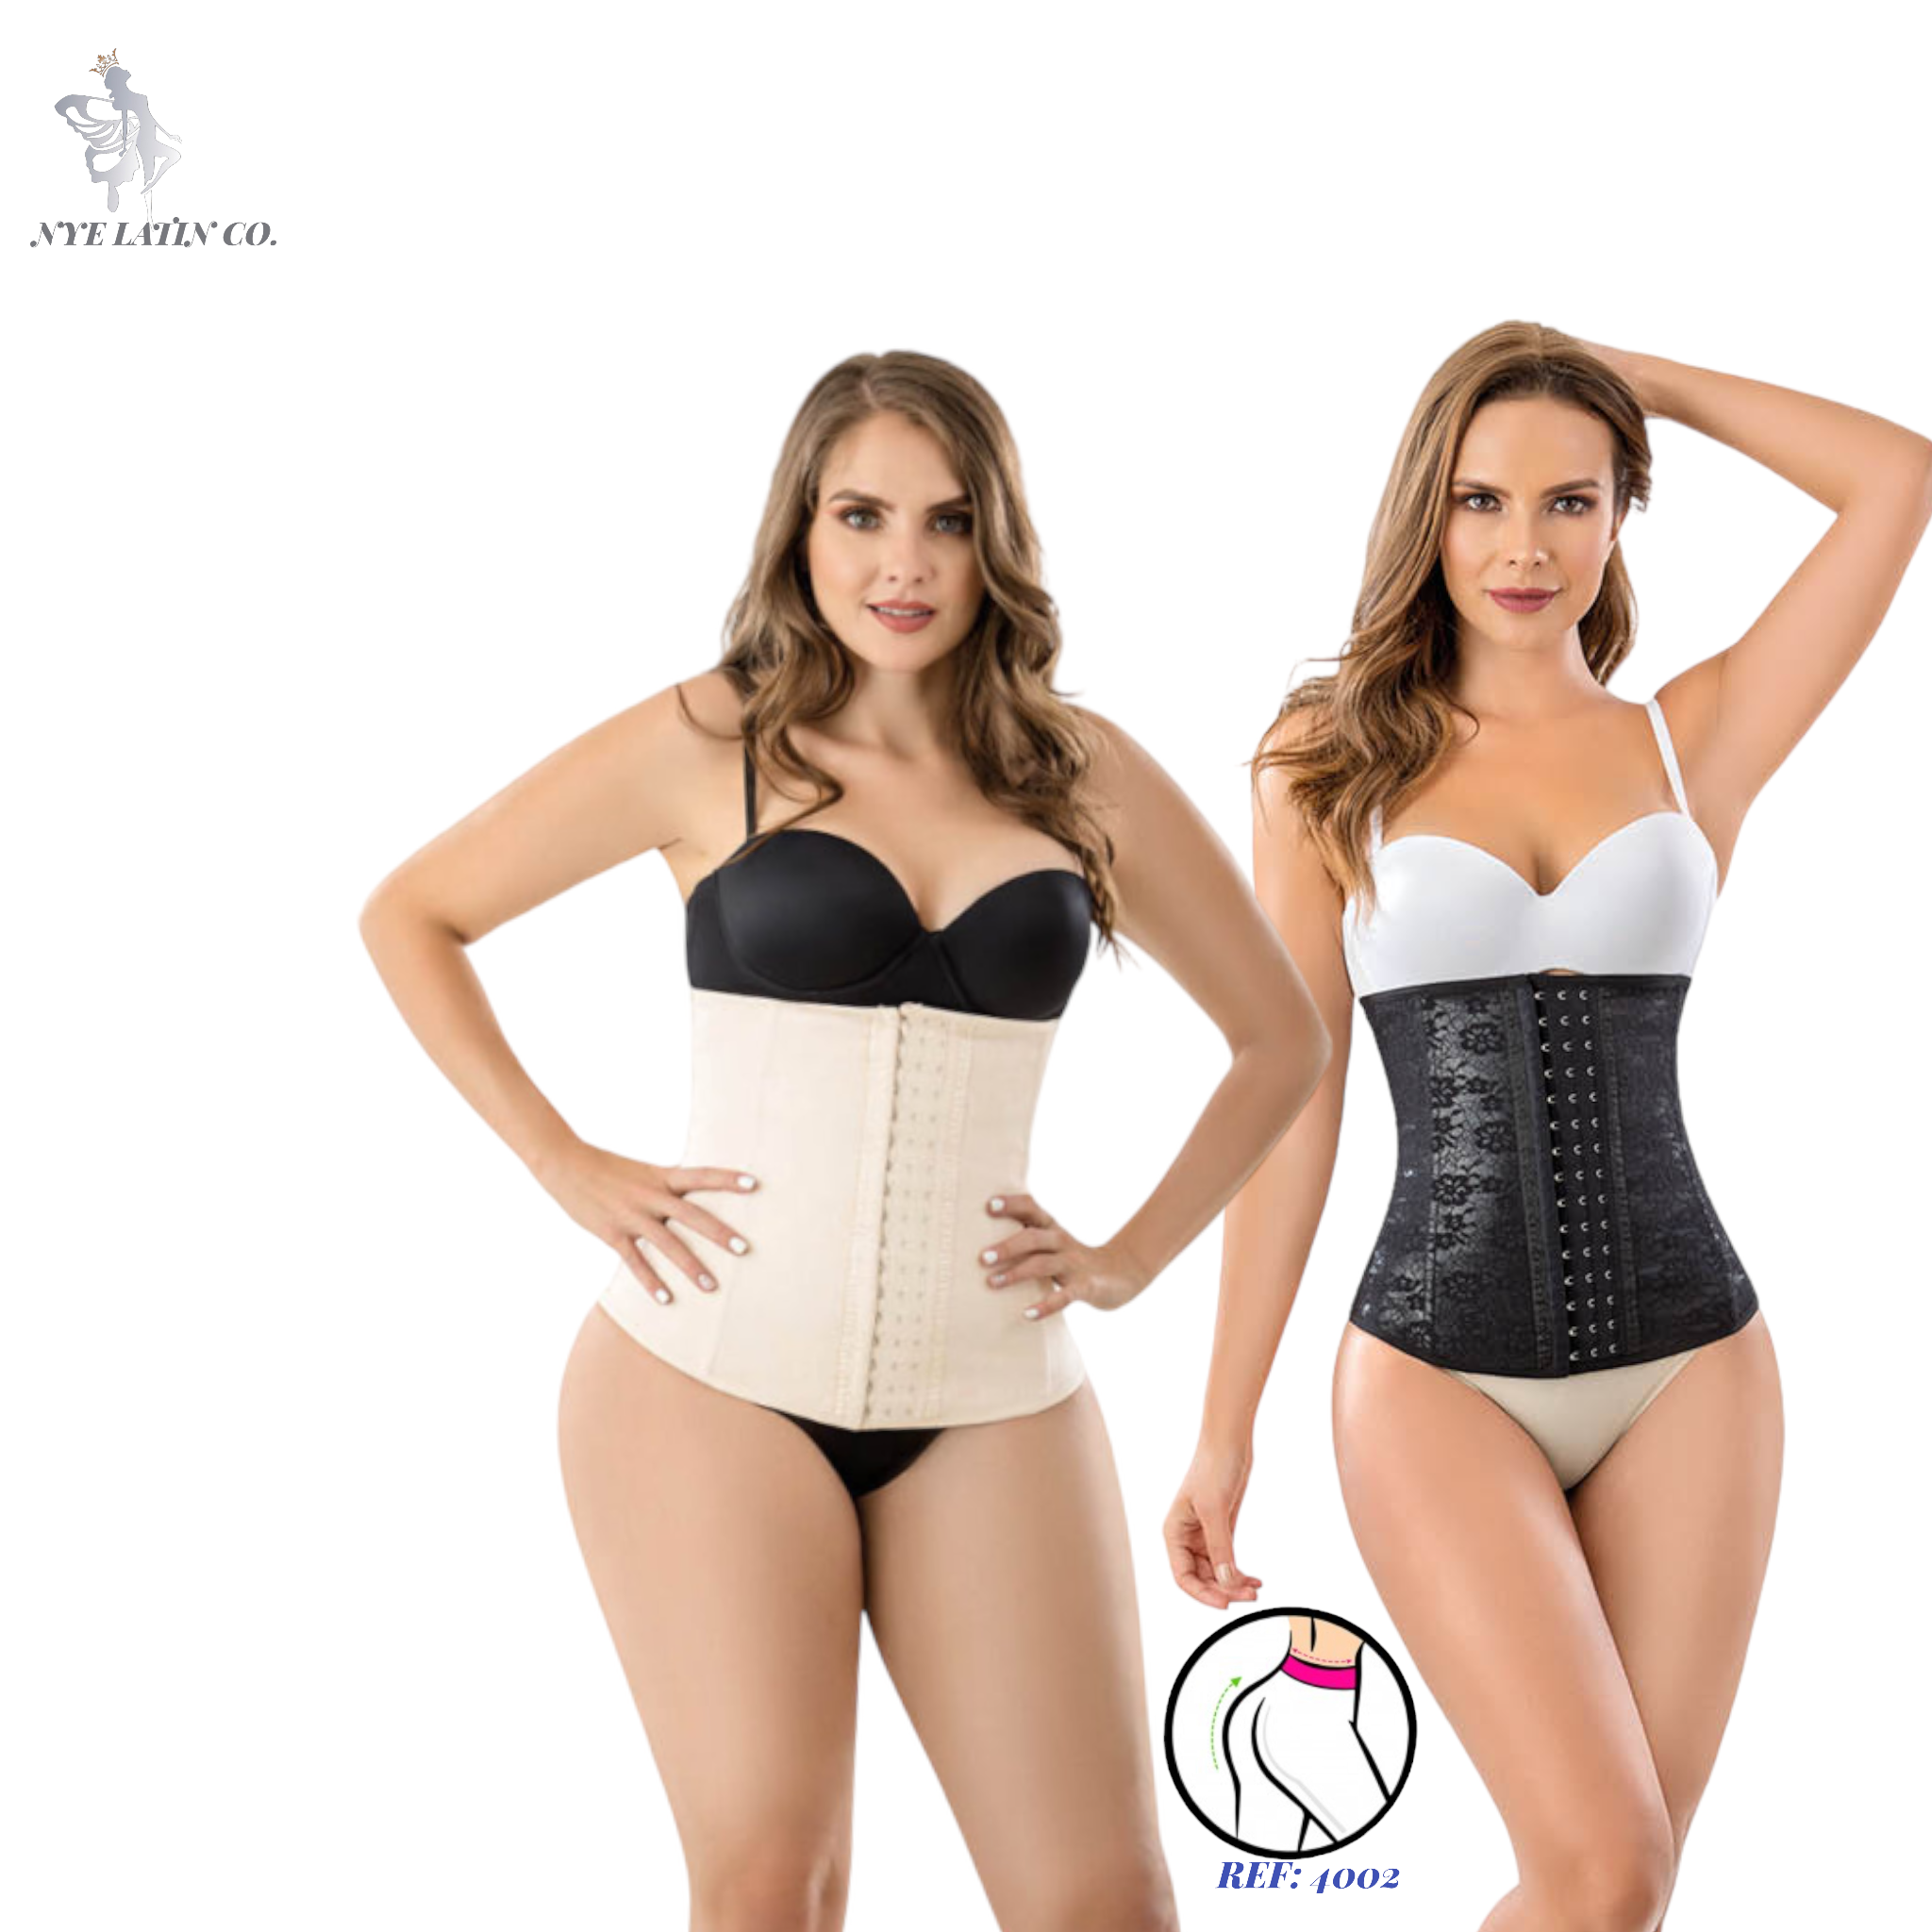 Fashion Foundations Kelowna - Shapewear season is upon us! Look and feel  extra great for your Christmas Party or New Year's Eve Gala with help from Janira  Shapewear! Perfect if you want